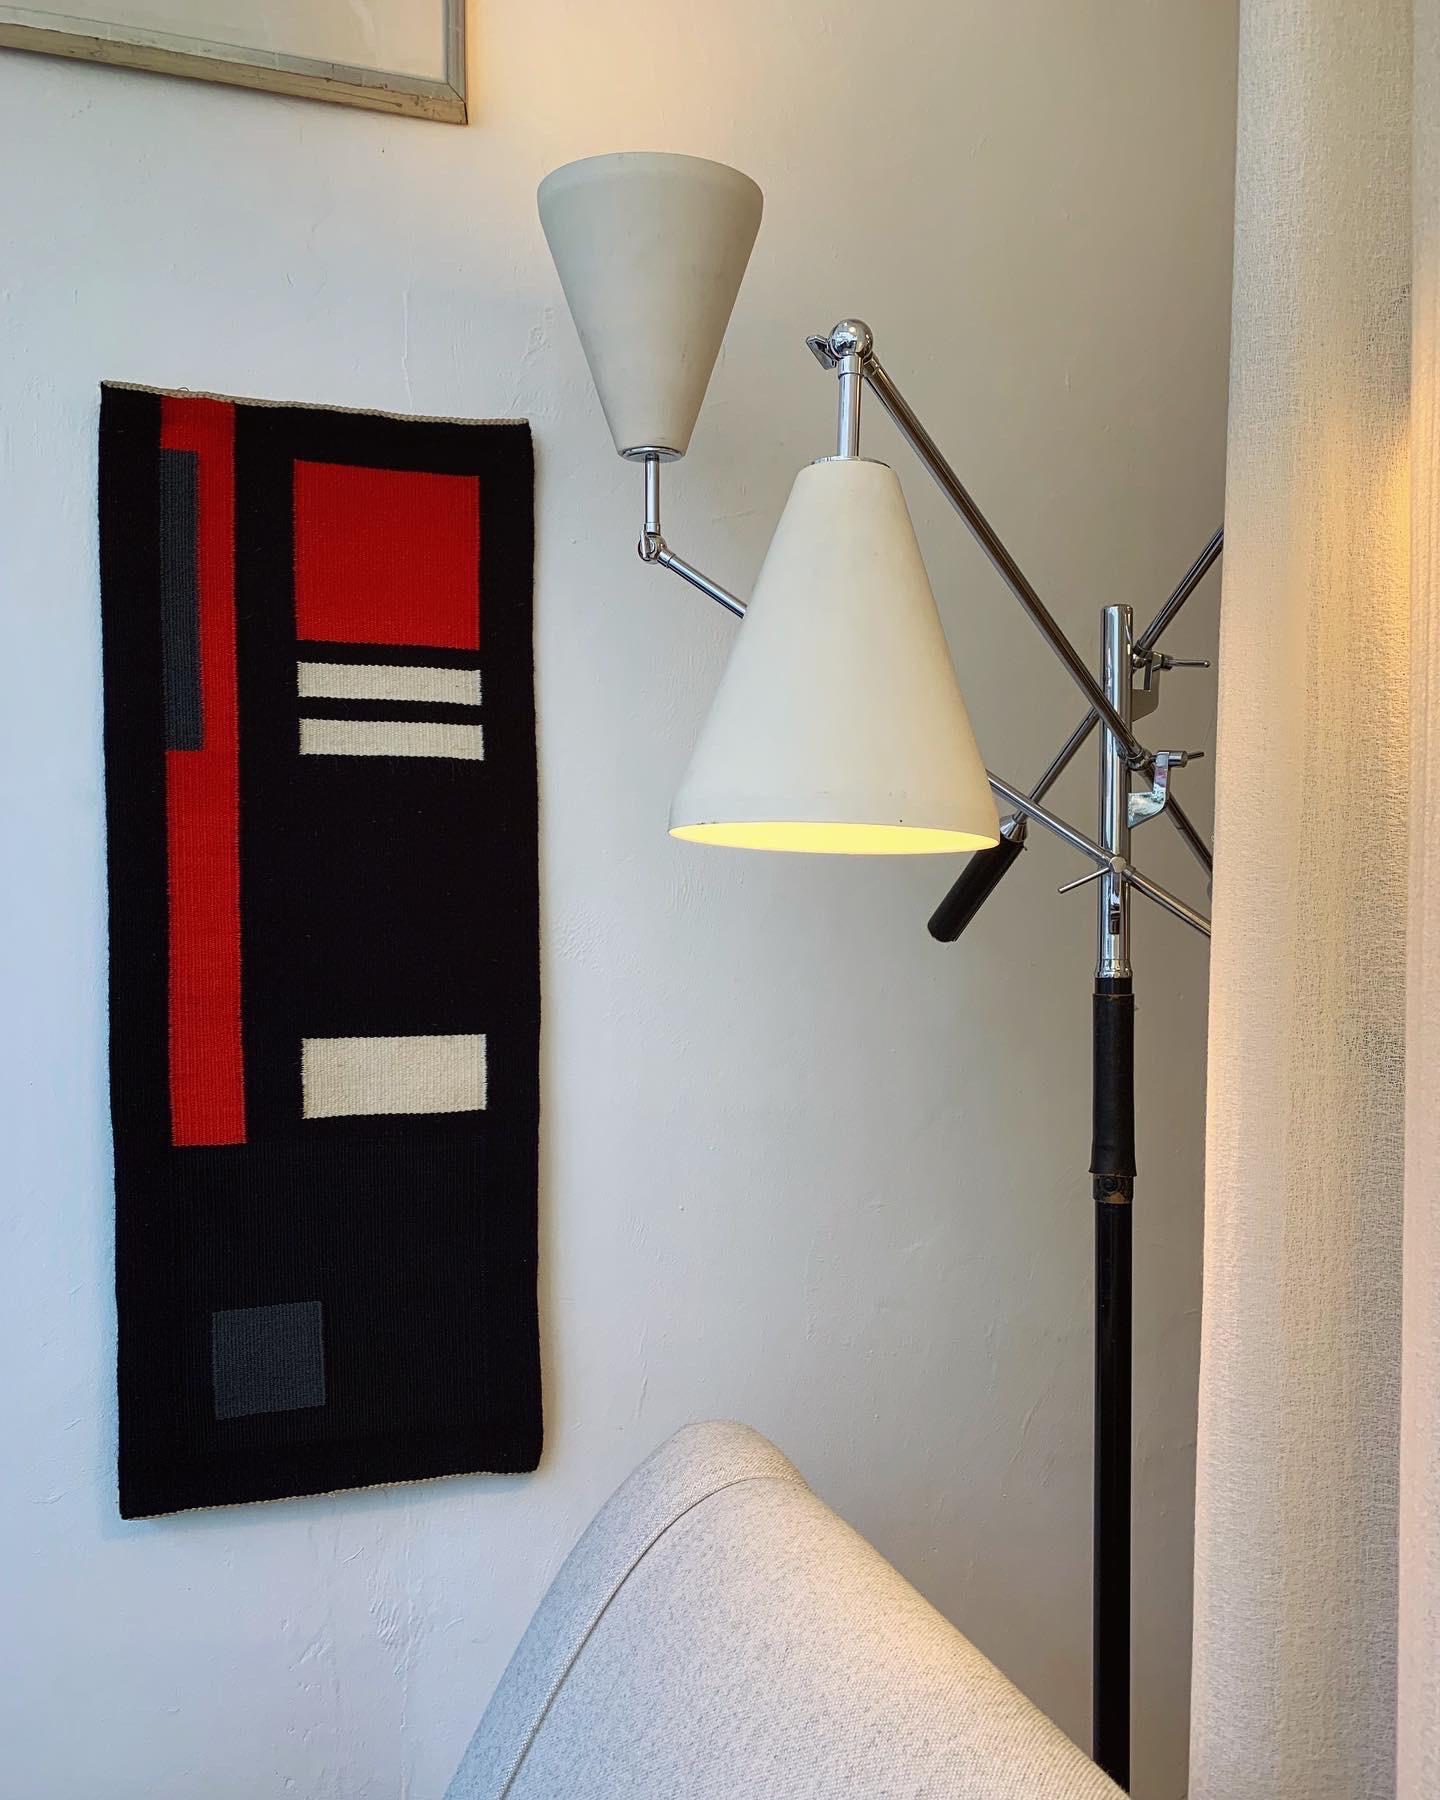 Abstract Modernist Wall Tapestry by Jette Thyssen Signed & Dated 1972, De Stijl 3